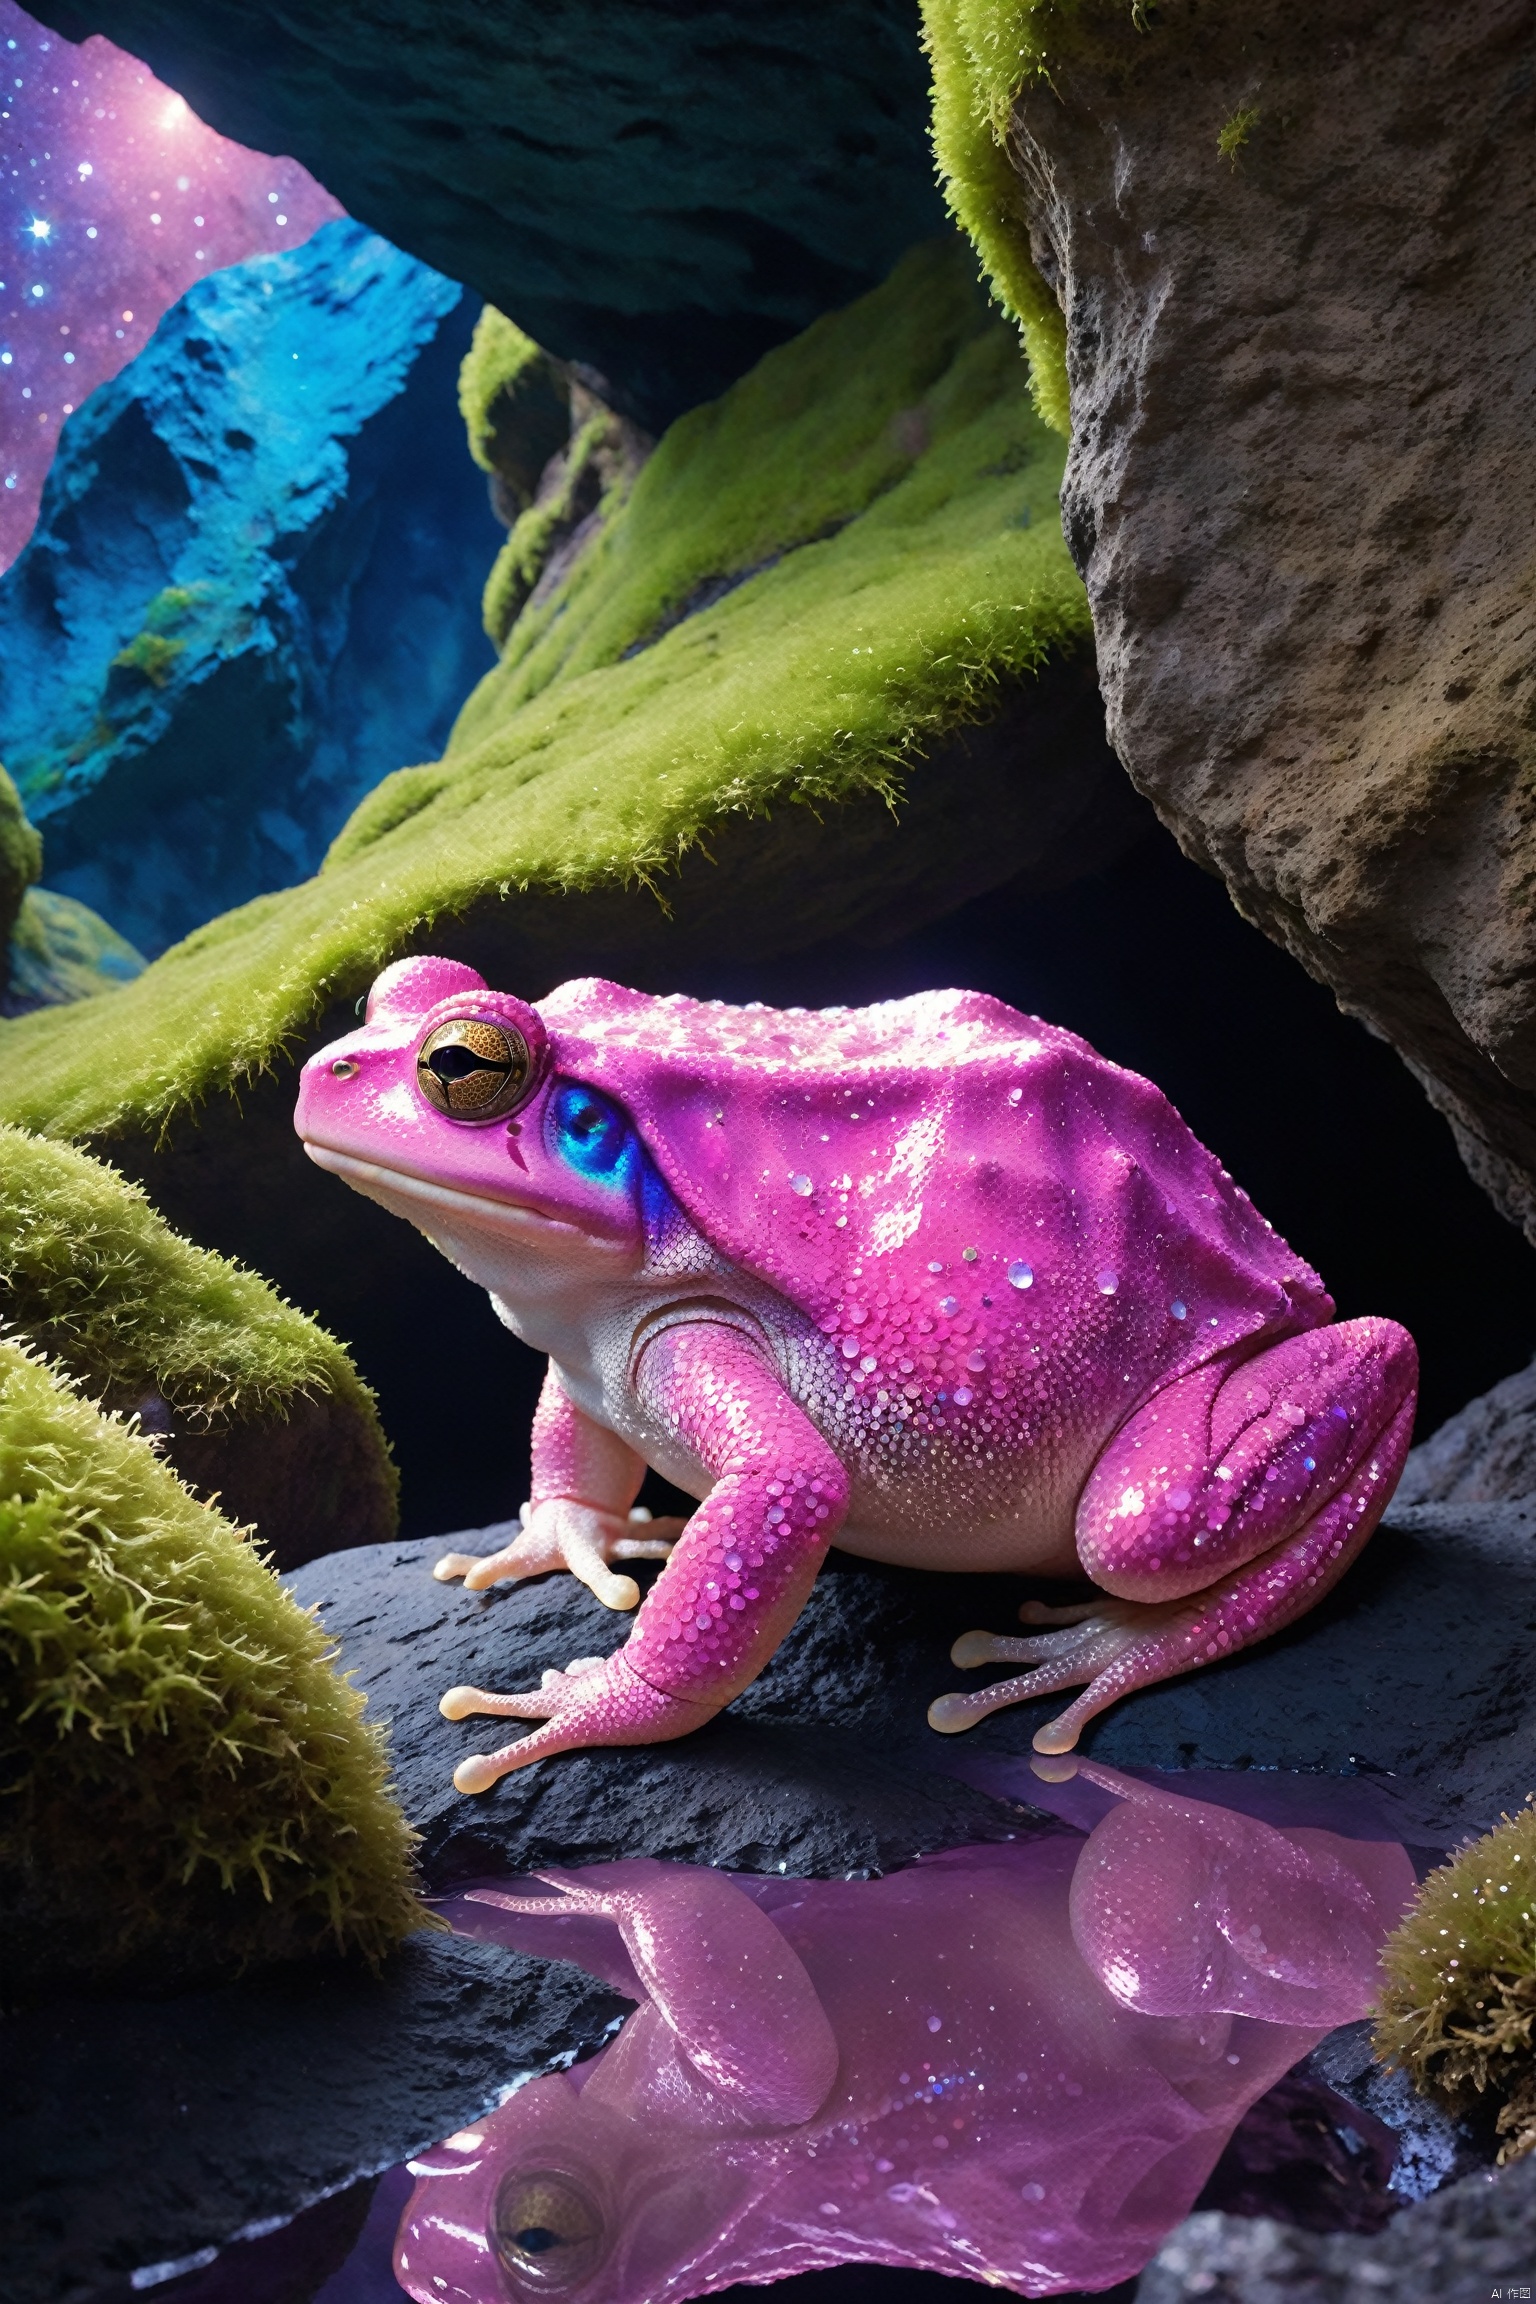 In a cavernous, mystical environment, a massive, pink-hued toad looms over a lone astronaut-like figure, the creature's skin textured with shades of lilac and cerulean, resembling glistening celestial bodies against a dark cave backdrop; jagged rock formations, coated in iridescent moss and dotted with luminous crystals,